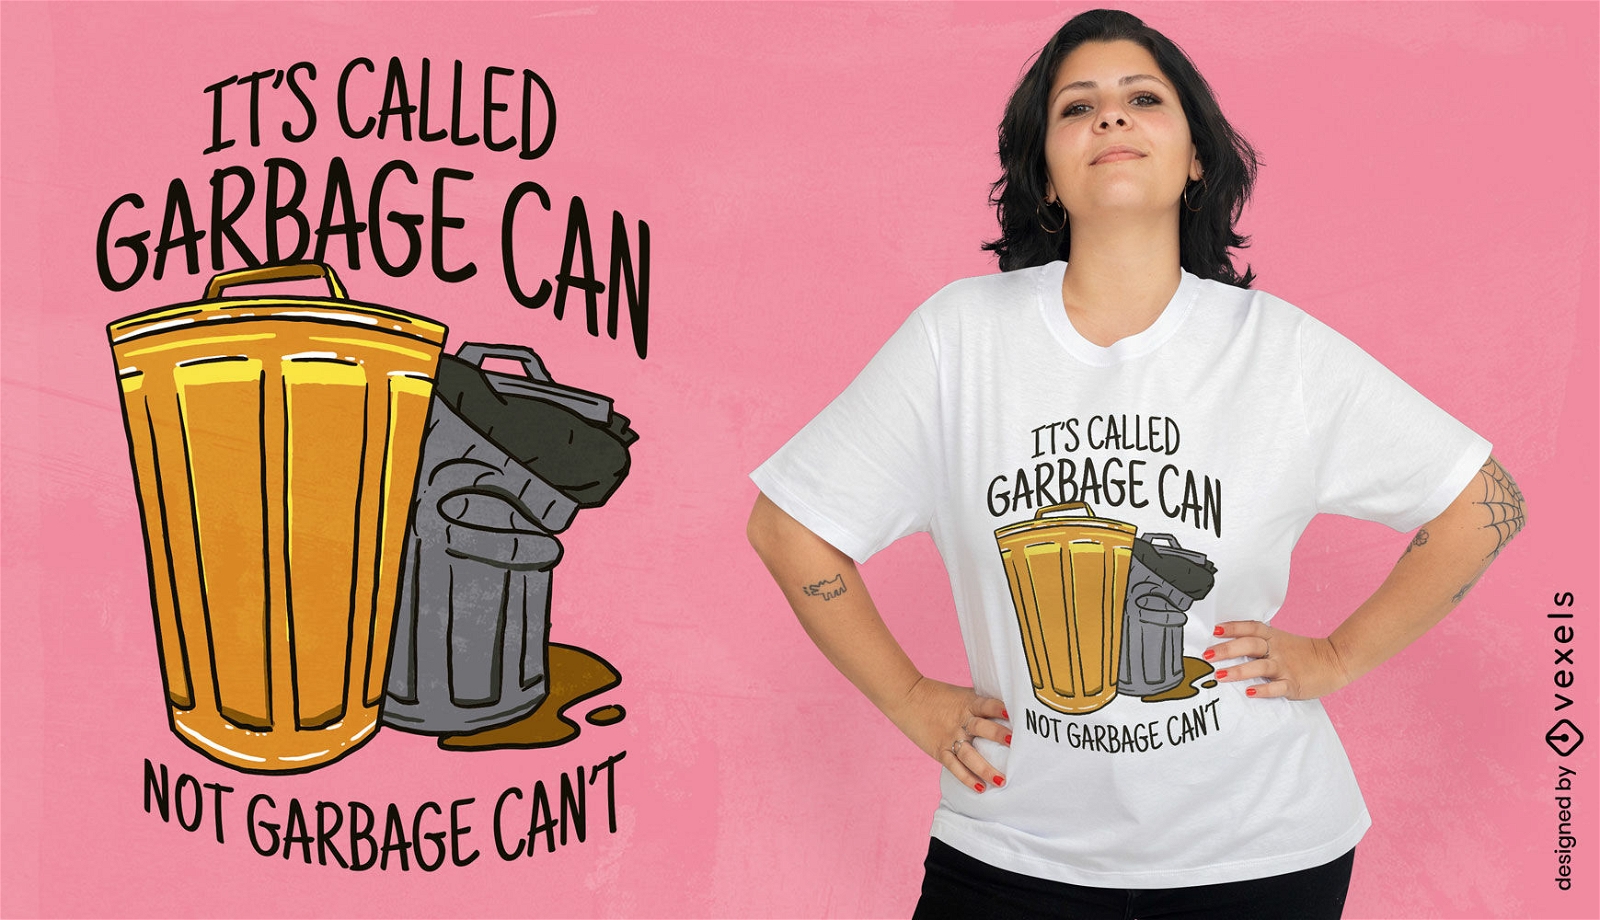 Garbage can quote t-shirt design